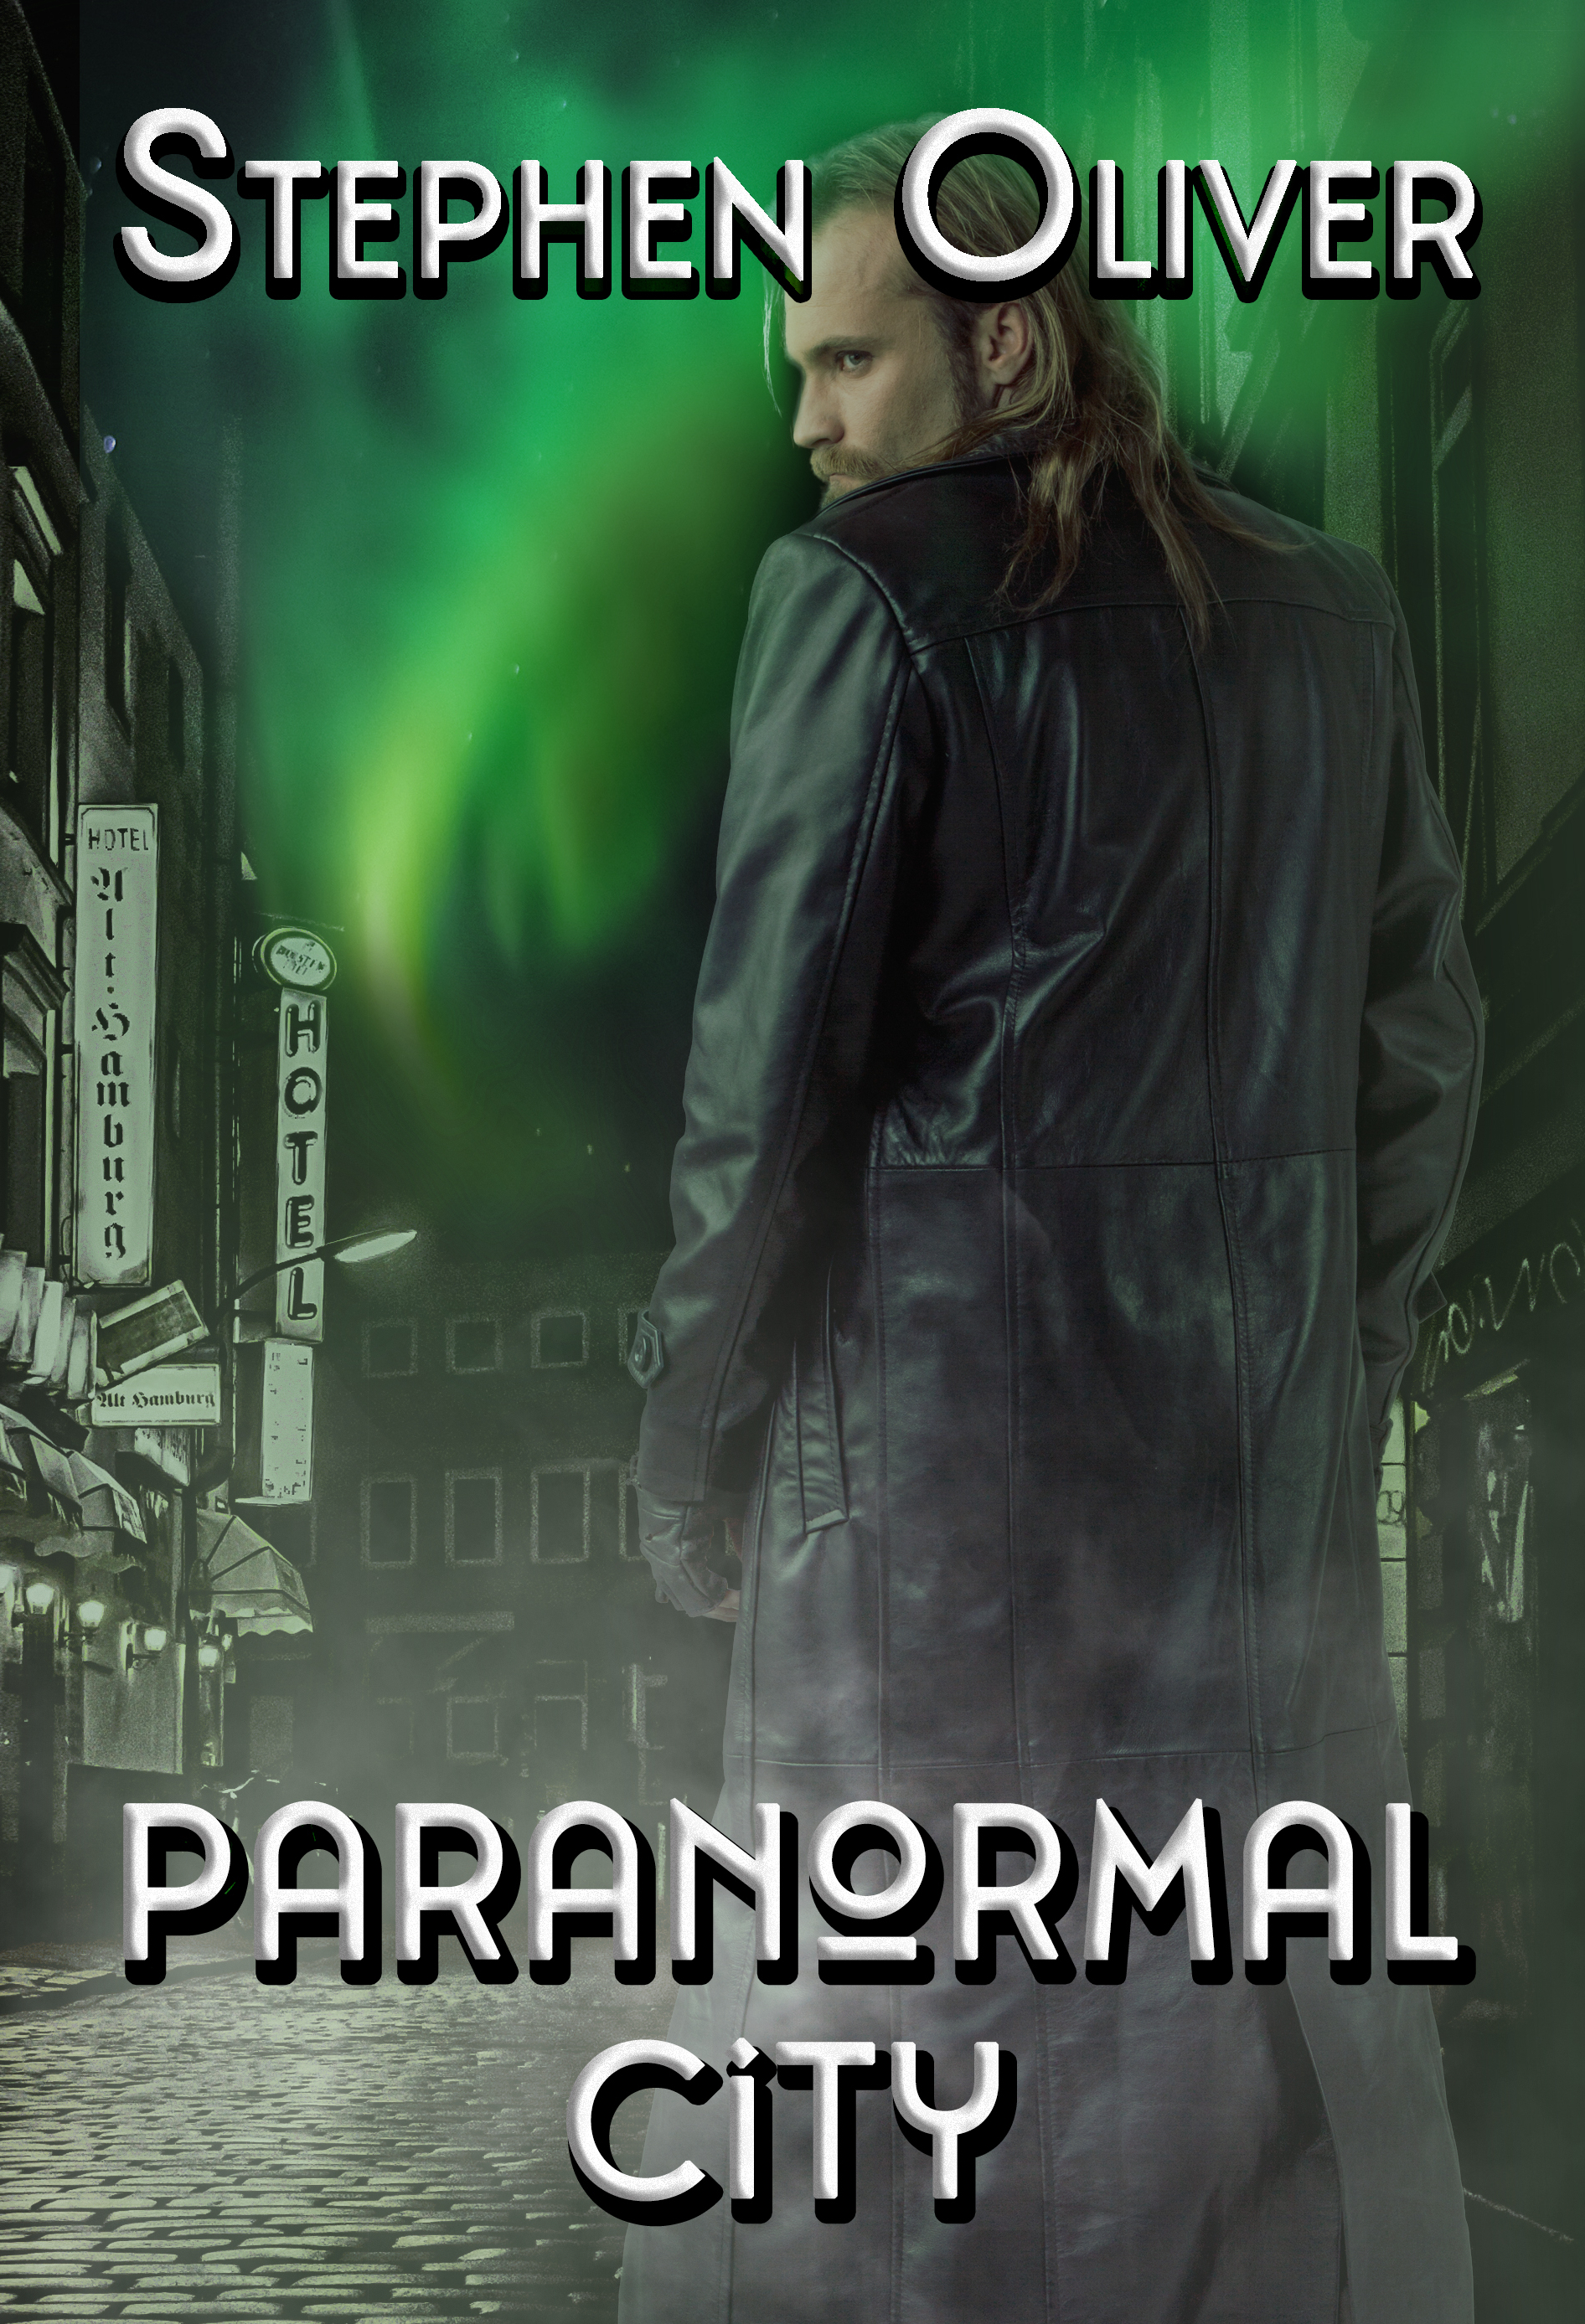 Love the smell of a new book in your hands? Then get your copy of Paranormal City today!